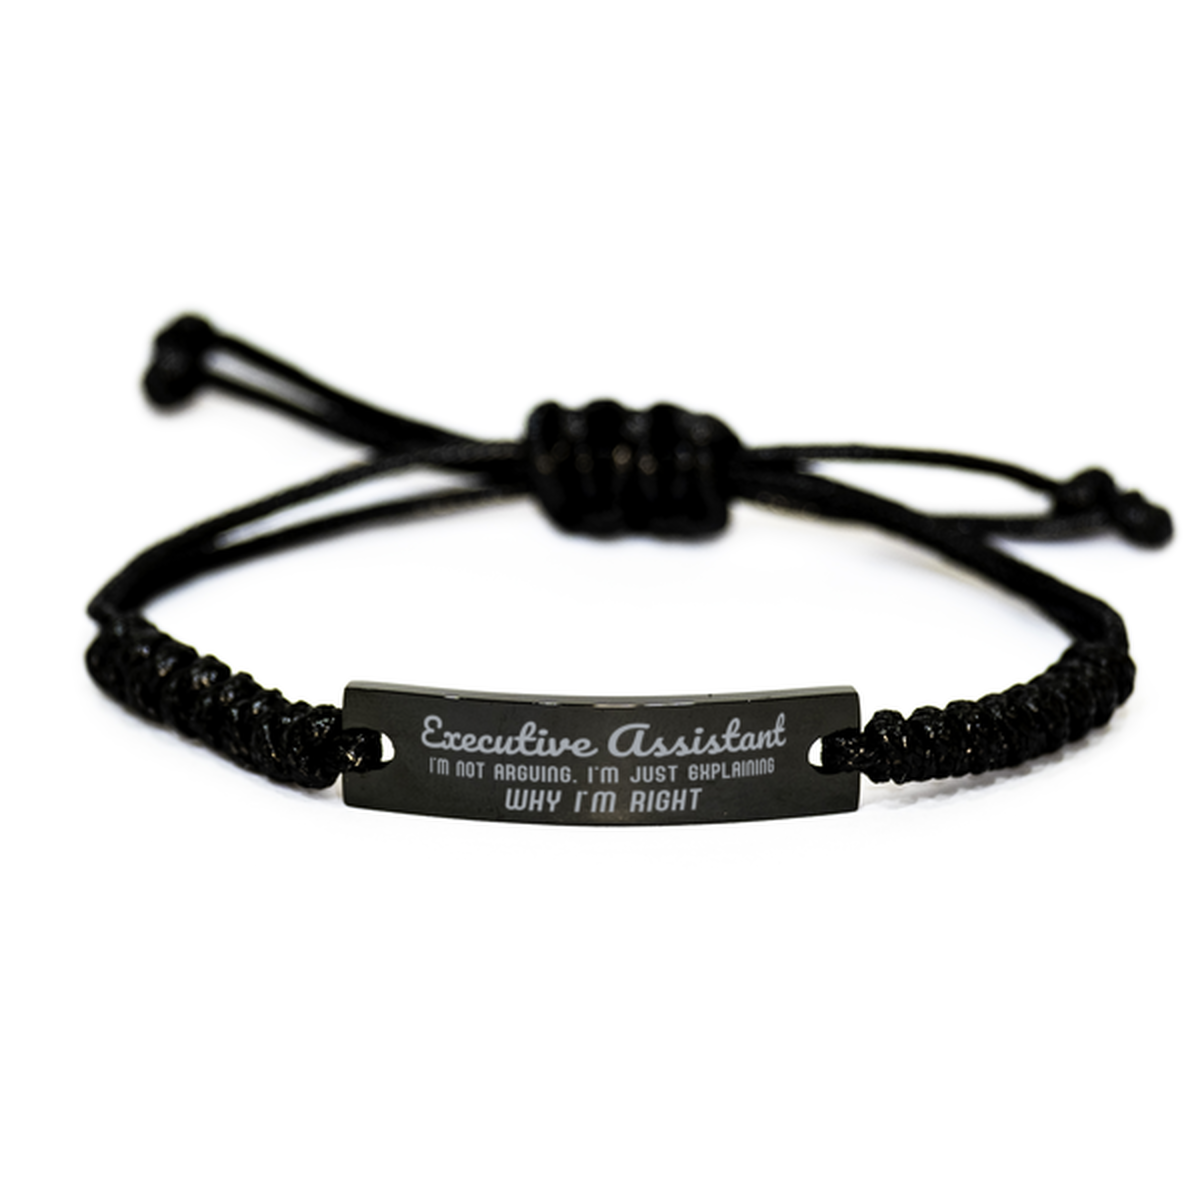 Executive Assistant I'm not Arguing. I'm Just Explaining Why I'm RIGHT Black Rope Bracelet, Funny Saying Quote Executive Assistant Gifts For Executive Assistant Graduation Birthday Christmas Gifts for Men Women Coworker